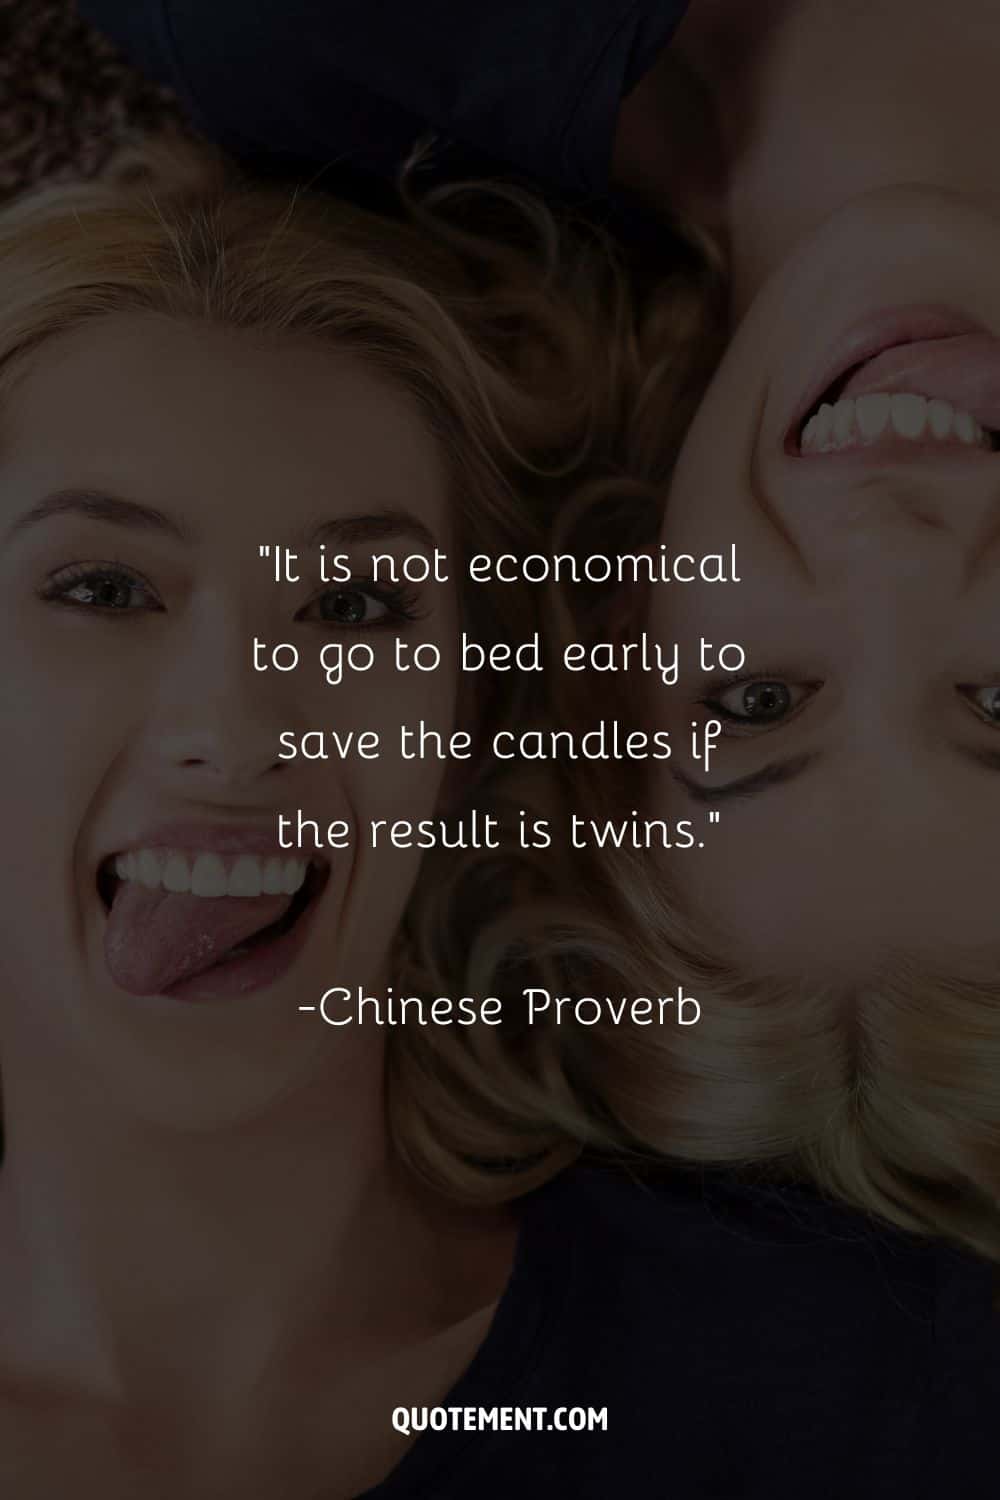 “It is not economical to go to bed early to save the candles if the result is twins.” – Chinese Proverb